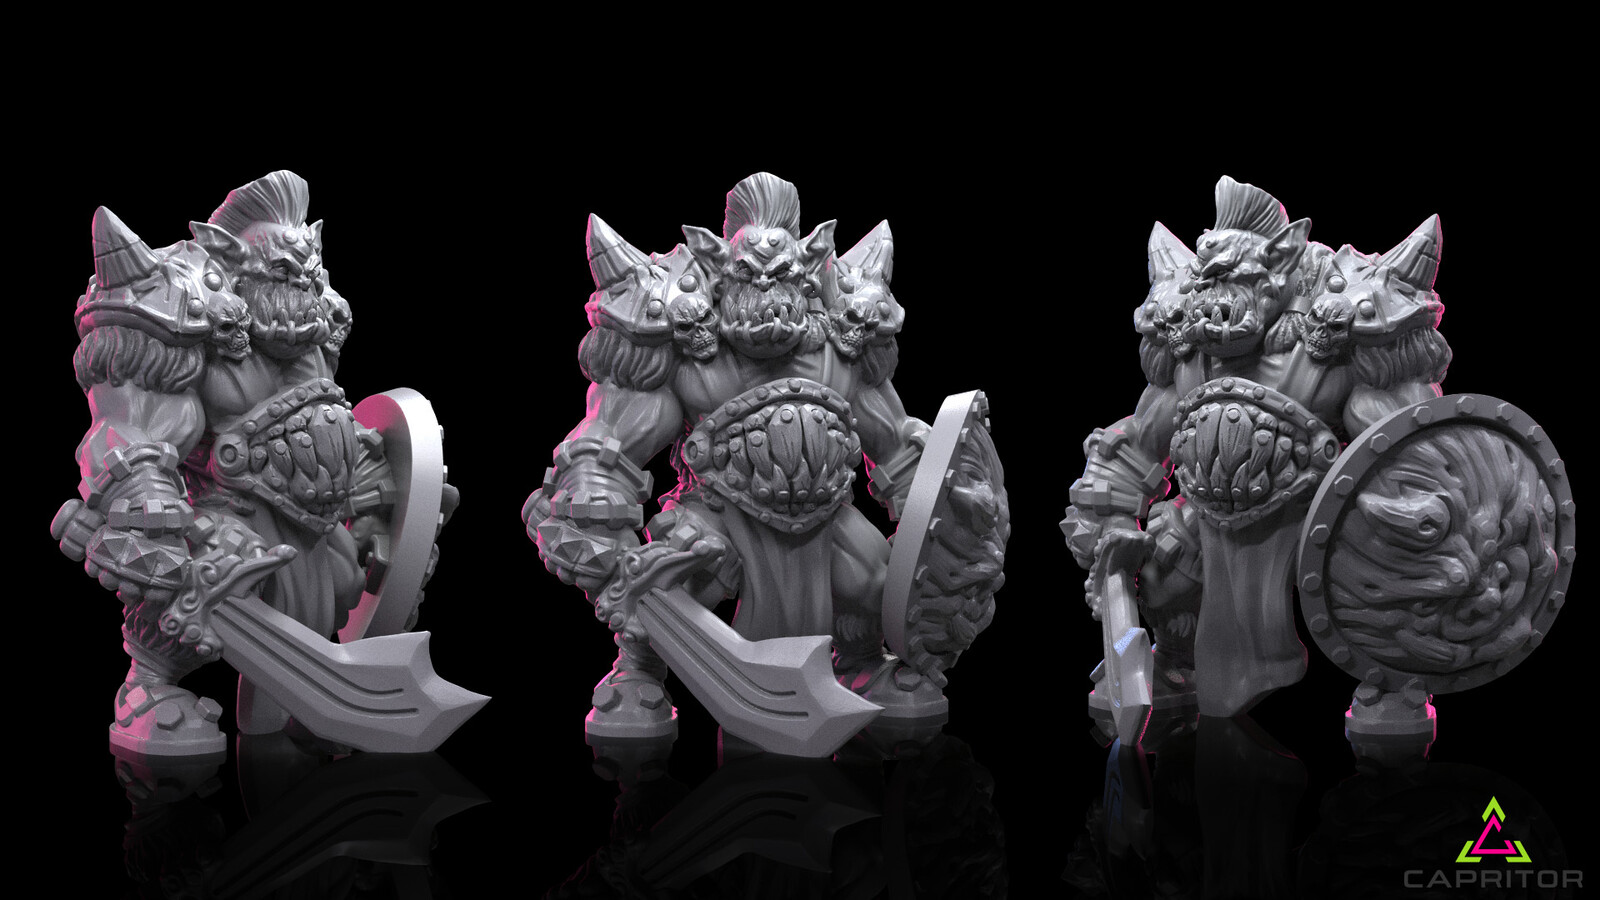 "Garthak" Part of our old-school "Orcs" product line. Zbrush Sculpture Shown